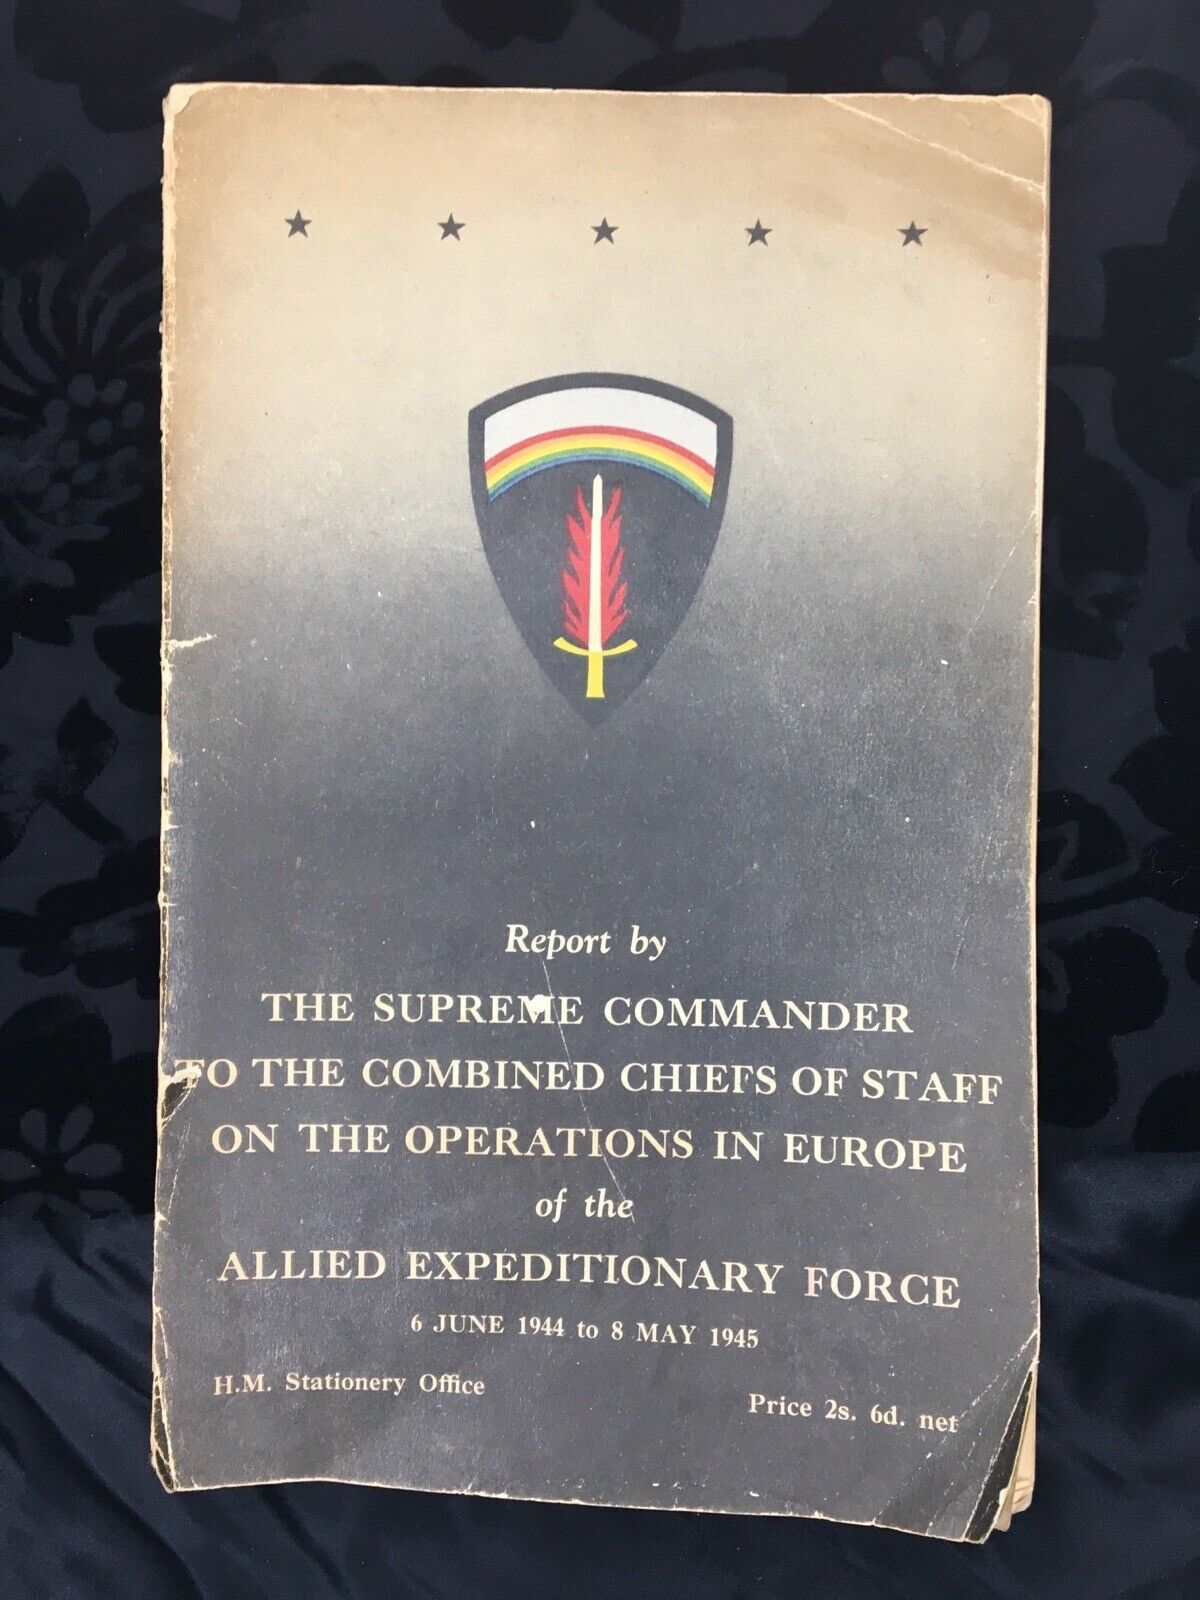 Collectors Original British First Edition-1946 Report by the Supreme Commander